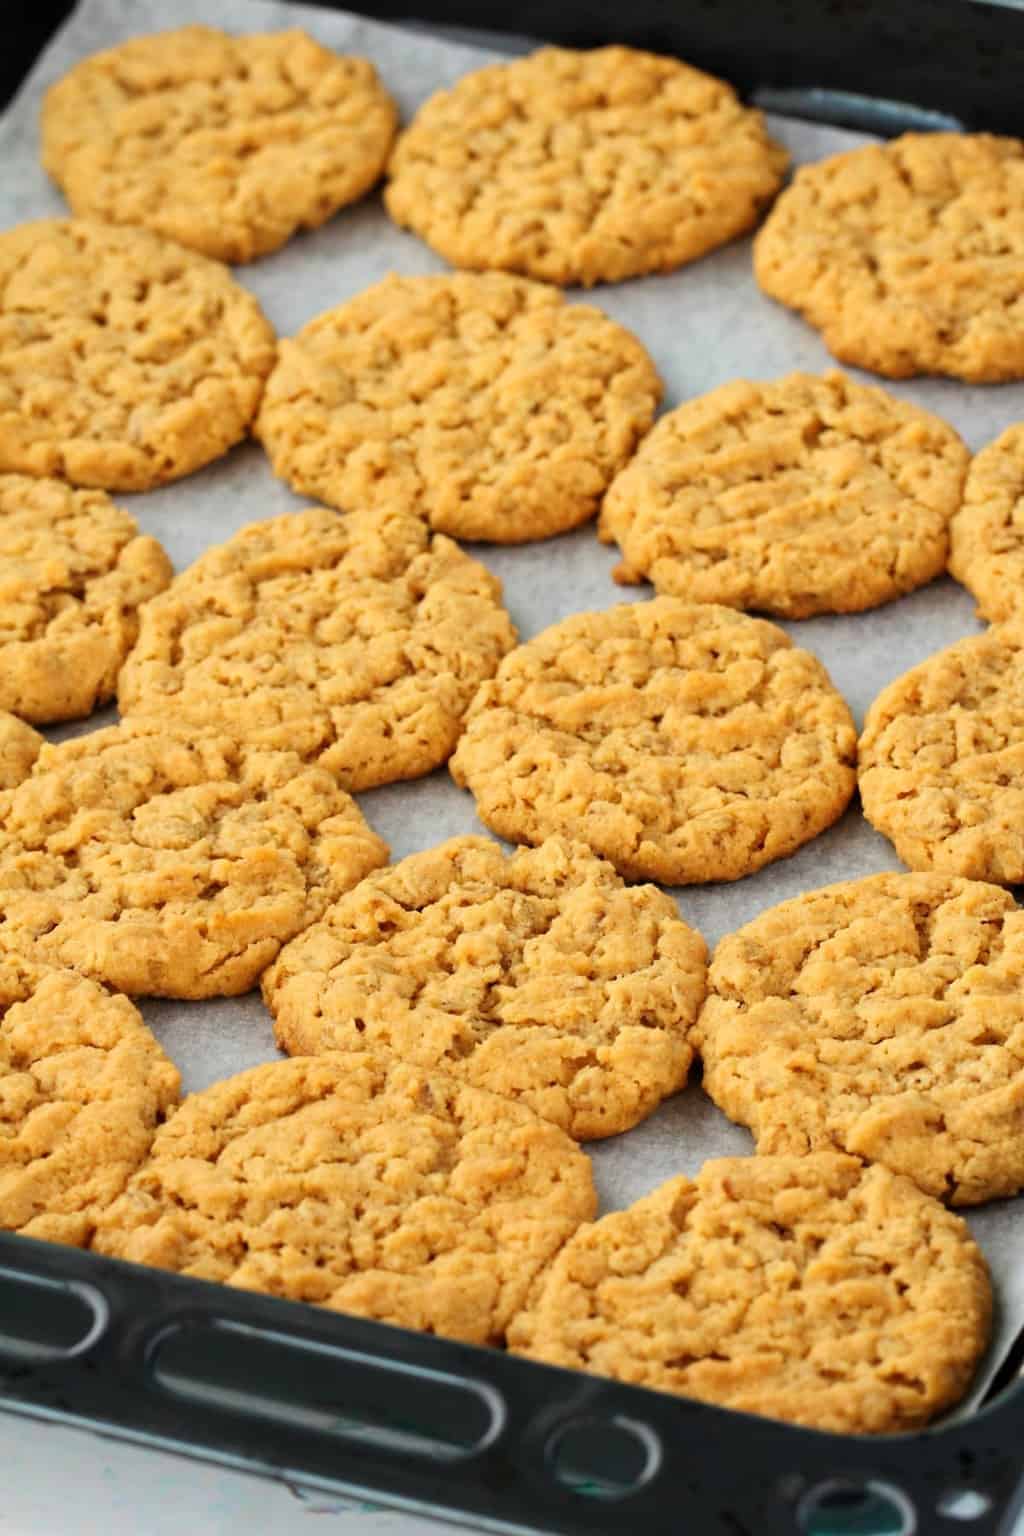 Freshly baked vegan peanut butter oatmeal cookies on a parchment lined baking tray. 